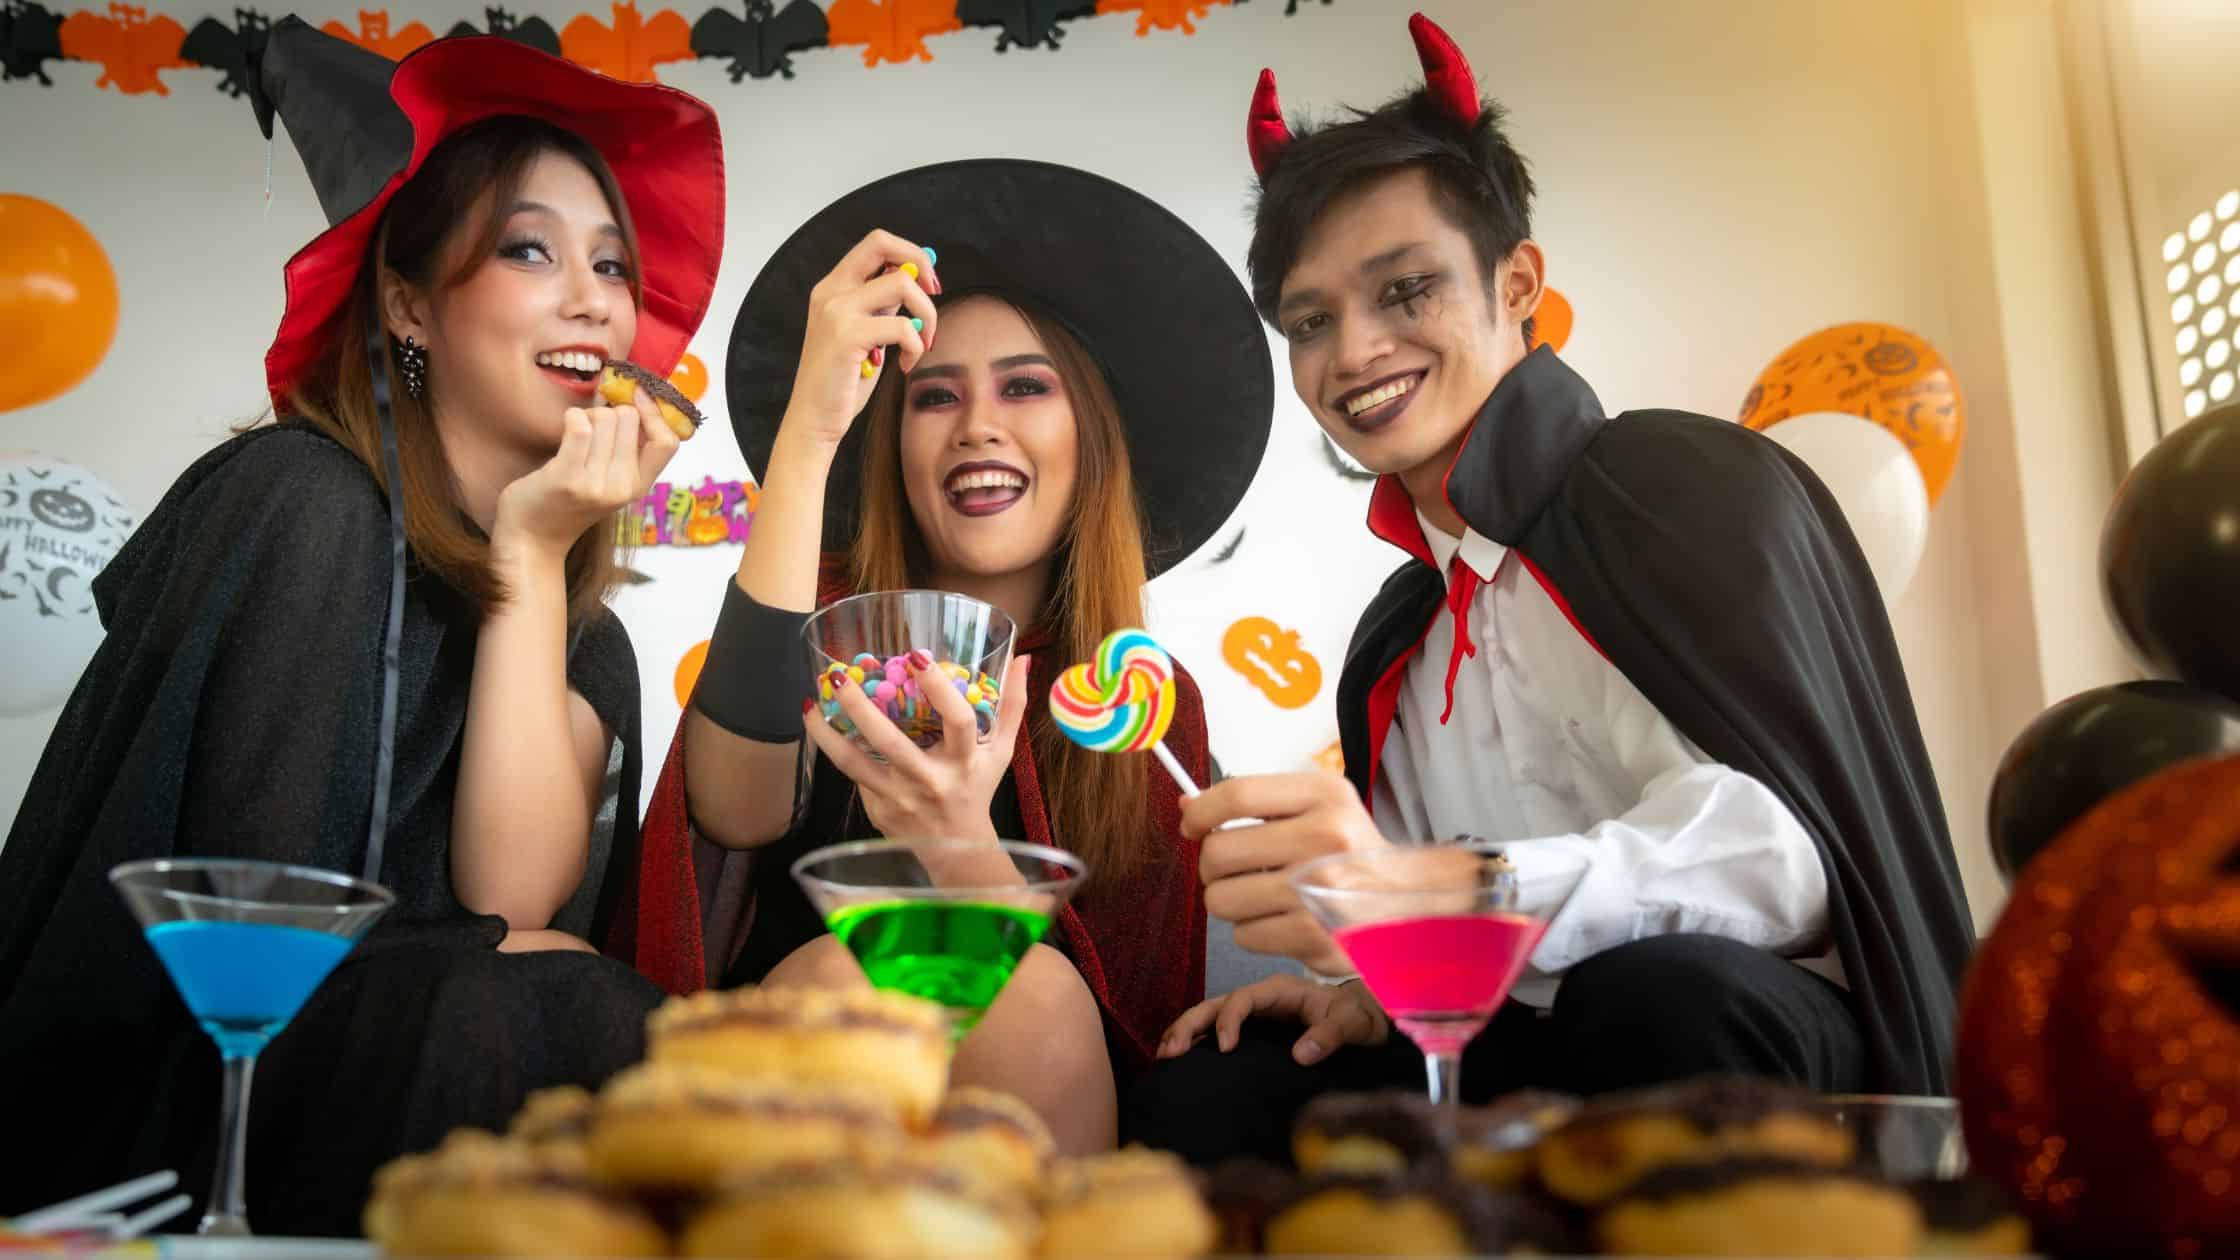 Unmask the secrets to celebrating Halloween at work. Dive into Halloween office party ideas and planning tips.